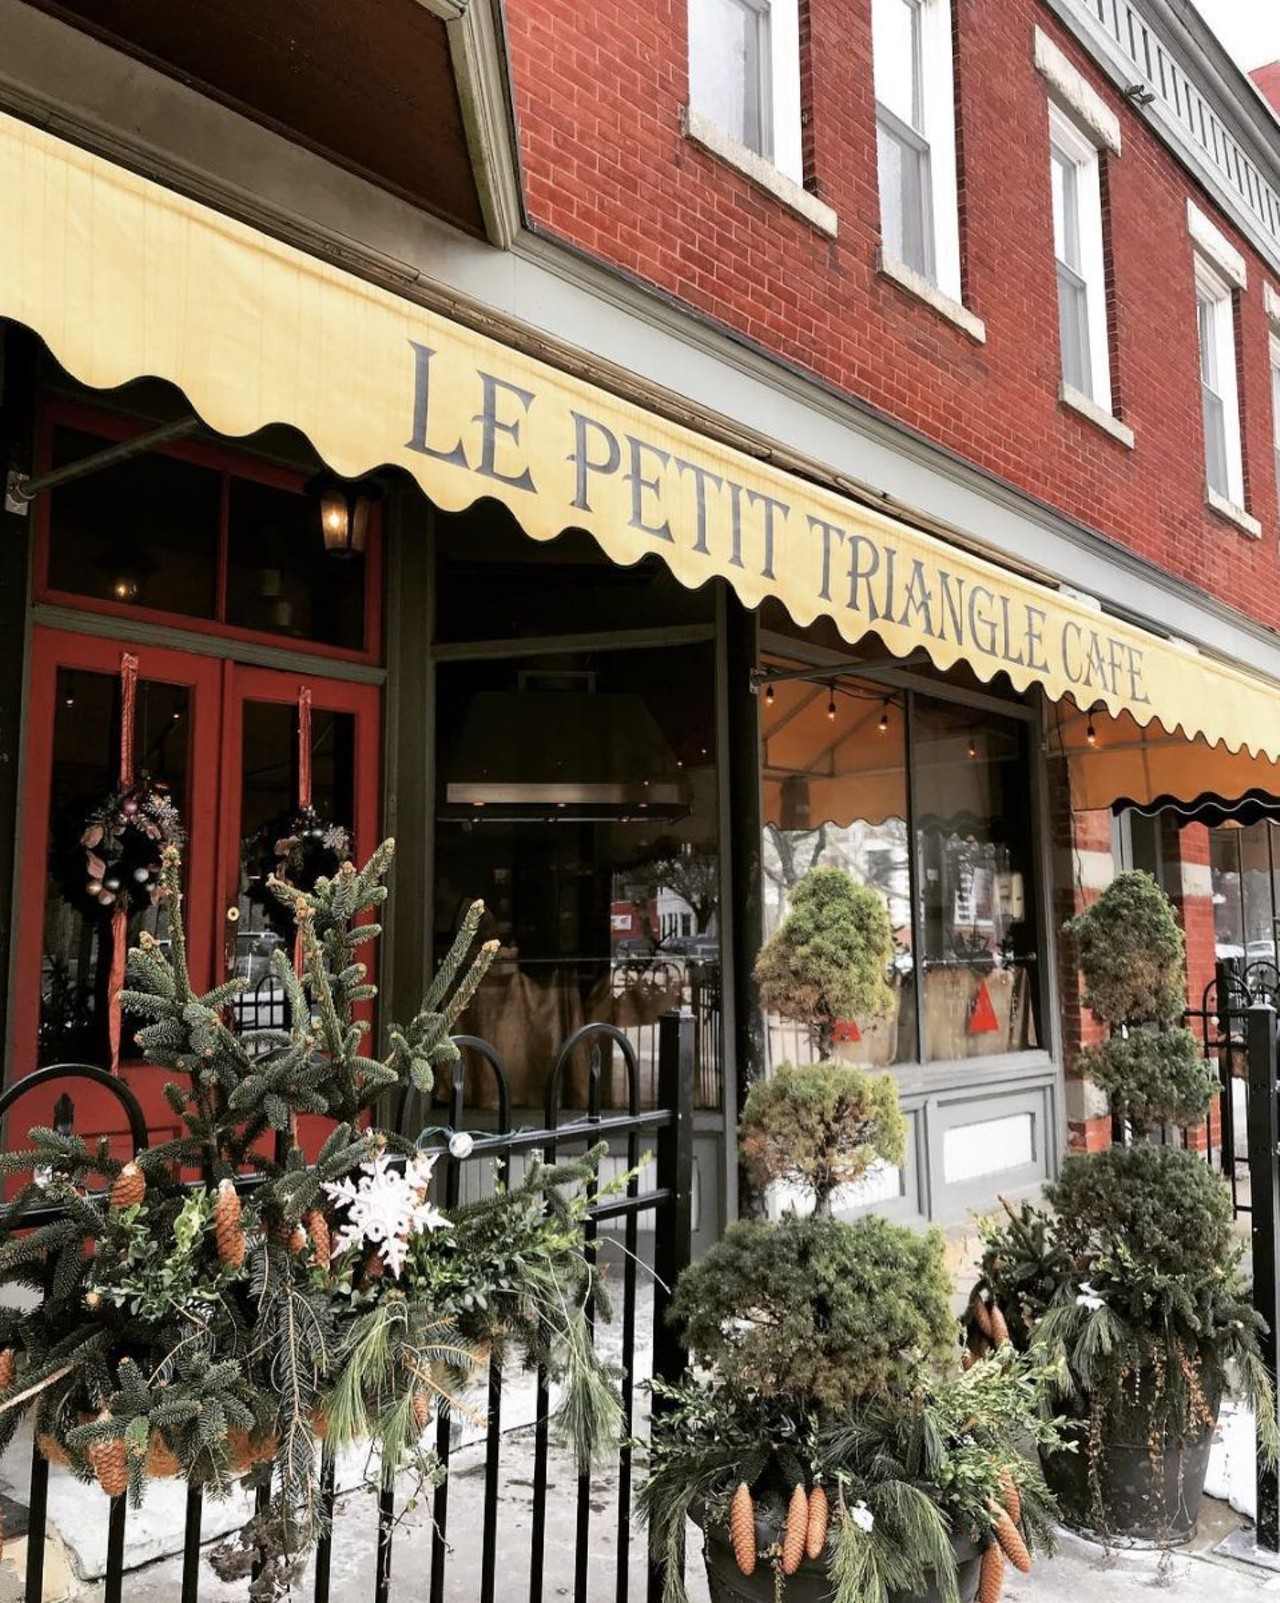  Le Petit Triangle
1881 Fulton Ave., (216) 281-1881
A little cramped, occasionally noisy, and quite possibly the city's smallest restaurant, this tiny French bistro still manages to turn out phenomenal food, especially when it comes to their crepes and other breakfast items. The Nutella french toast is as good as it sounds and they have one of the best shakshuka in town. You&#146;ll be transported to Paris for a couple hours here. 
Photo via Scene Archives